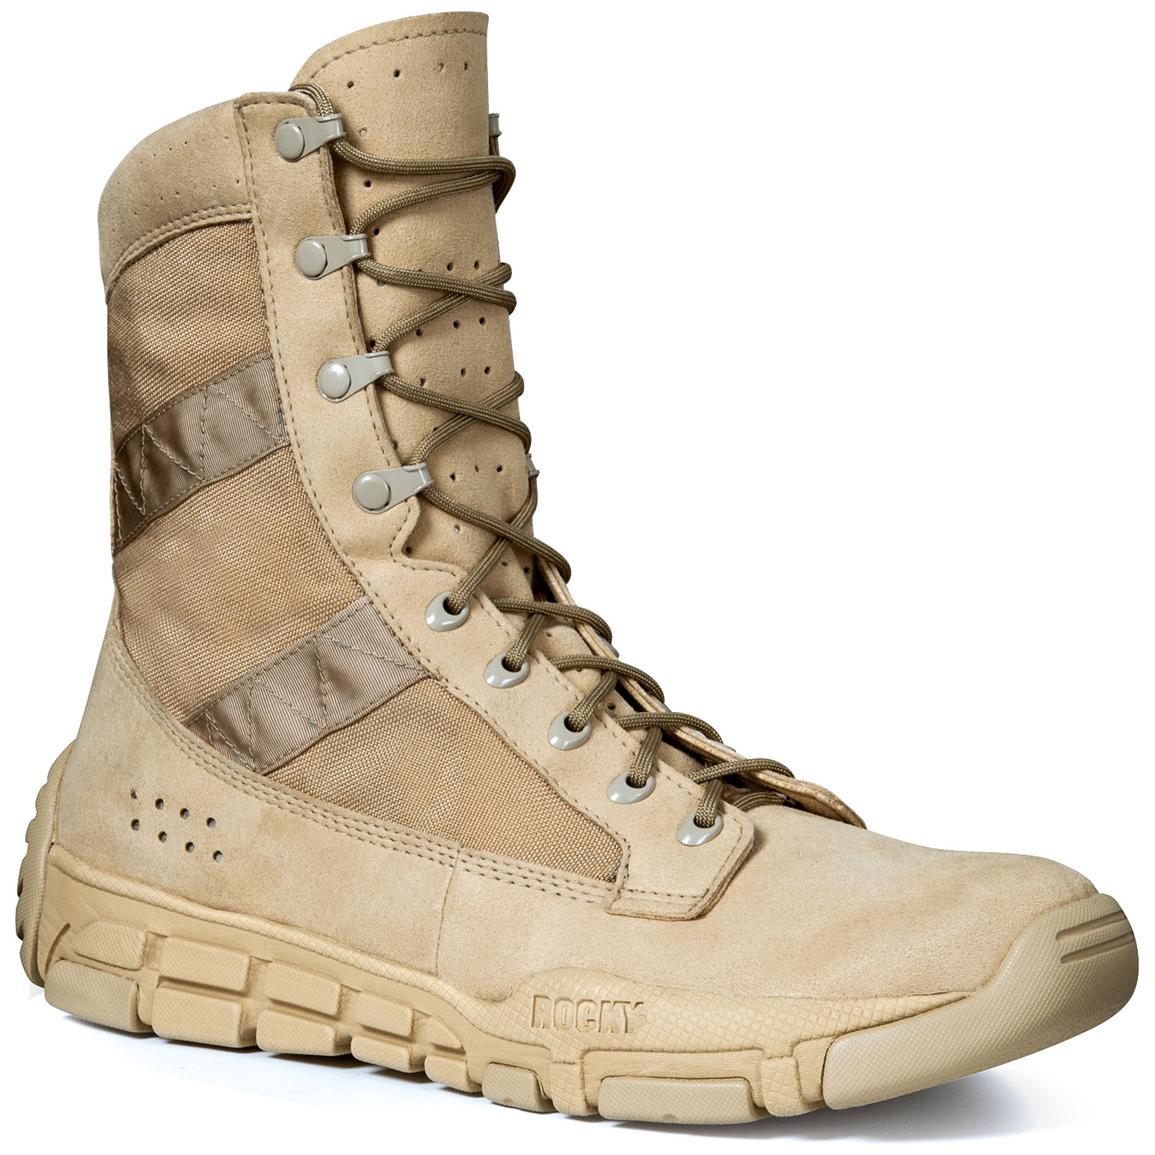 Men's Rocky® C4T Military Boots 218841, Combat & Tactical Boots at Sportsman's Guide